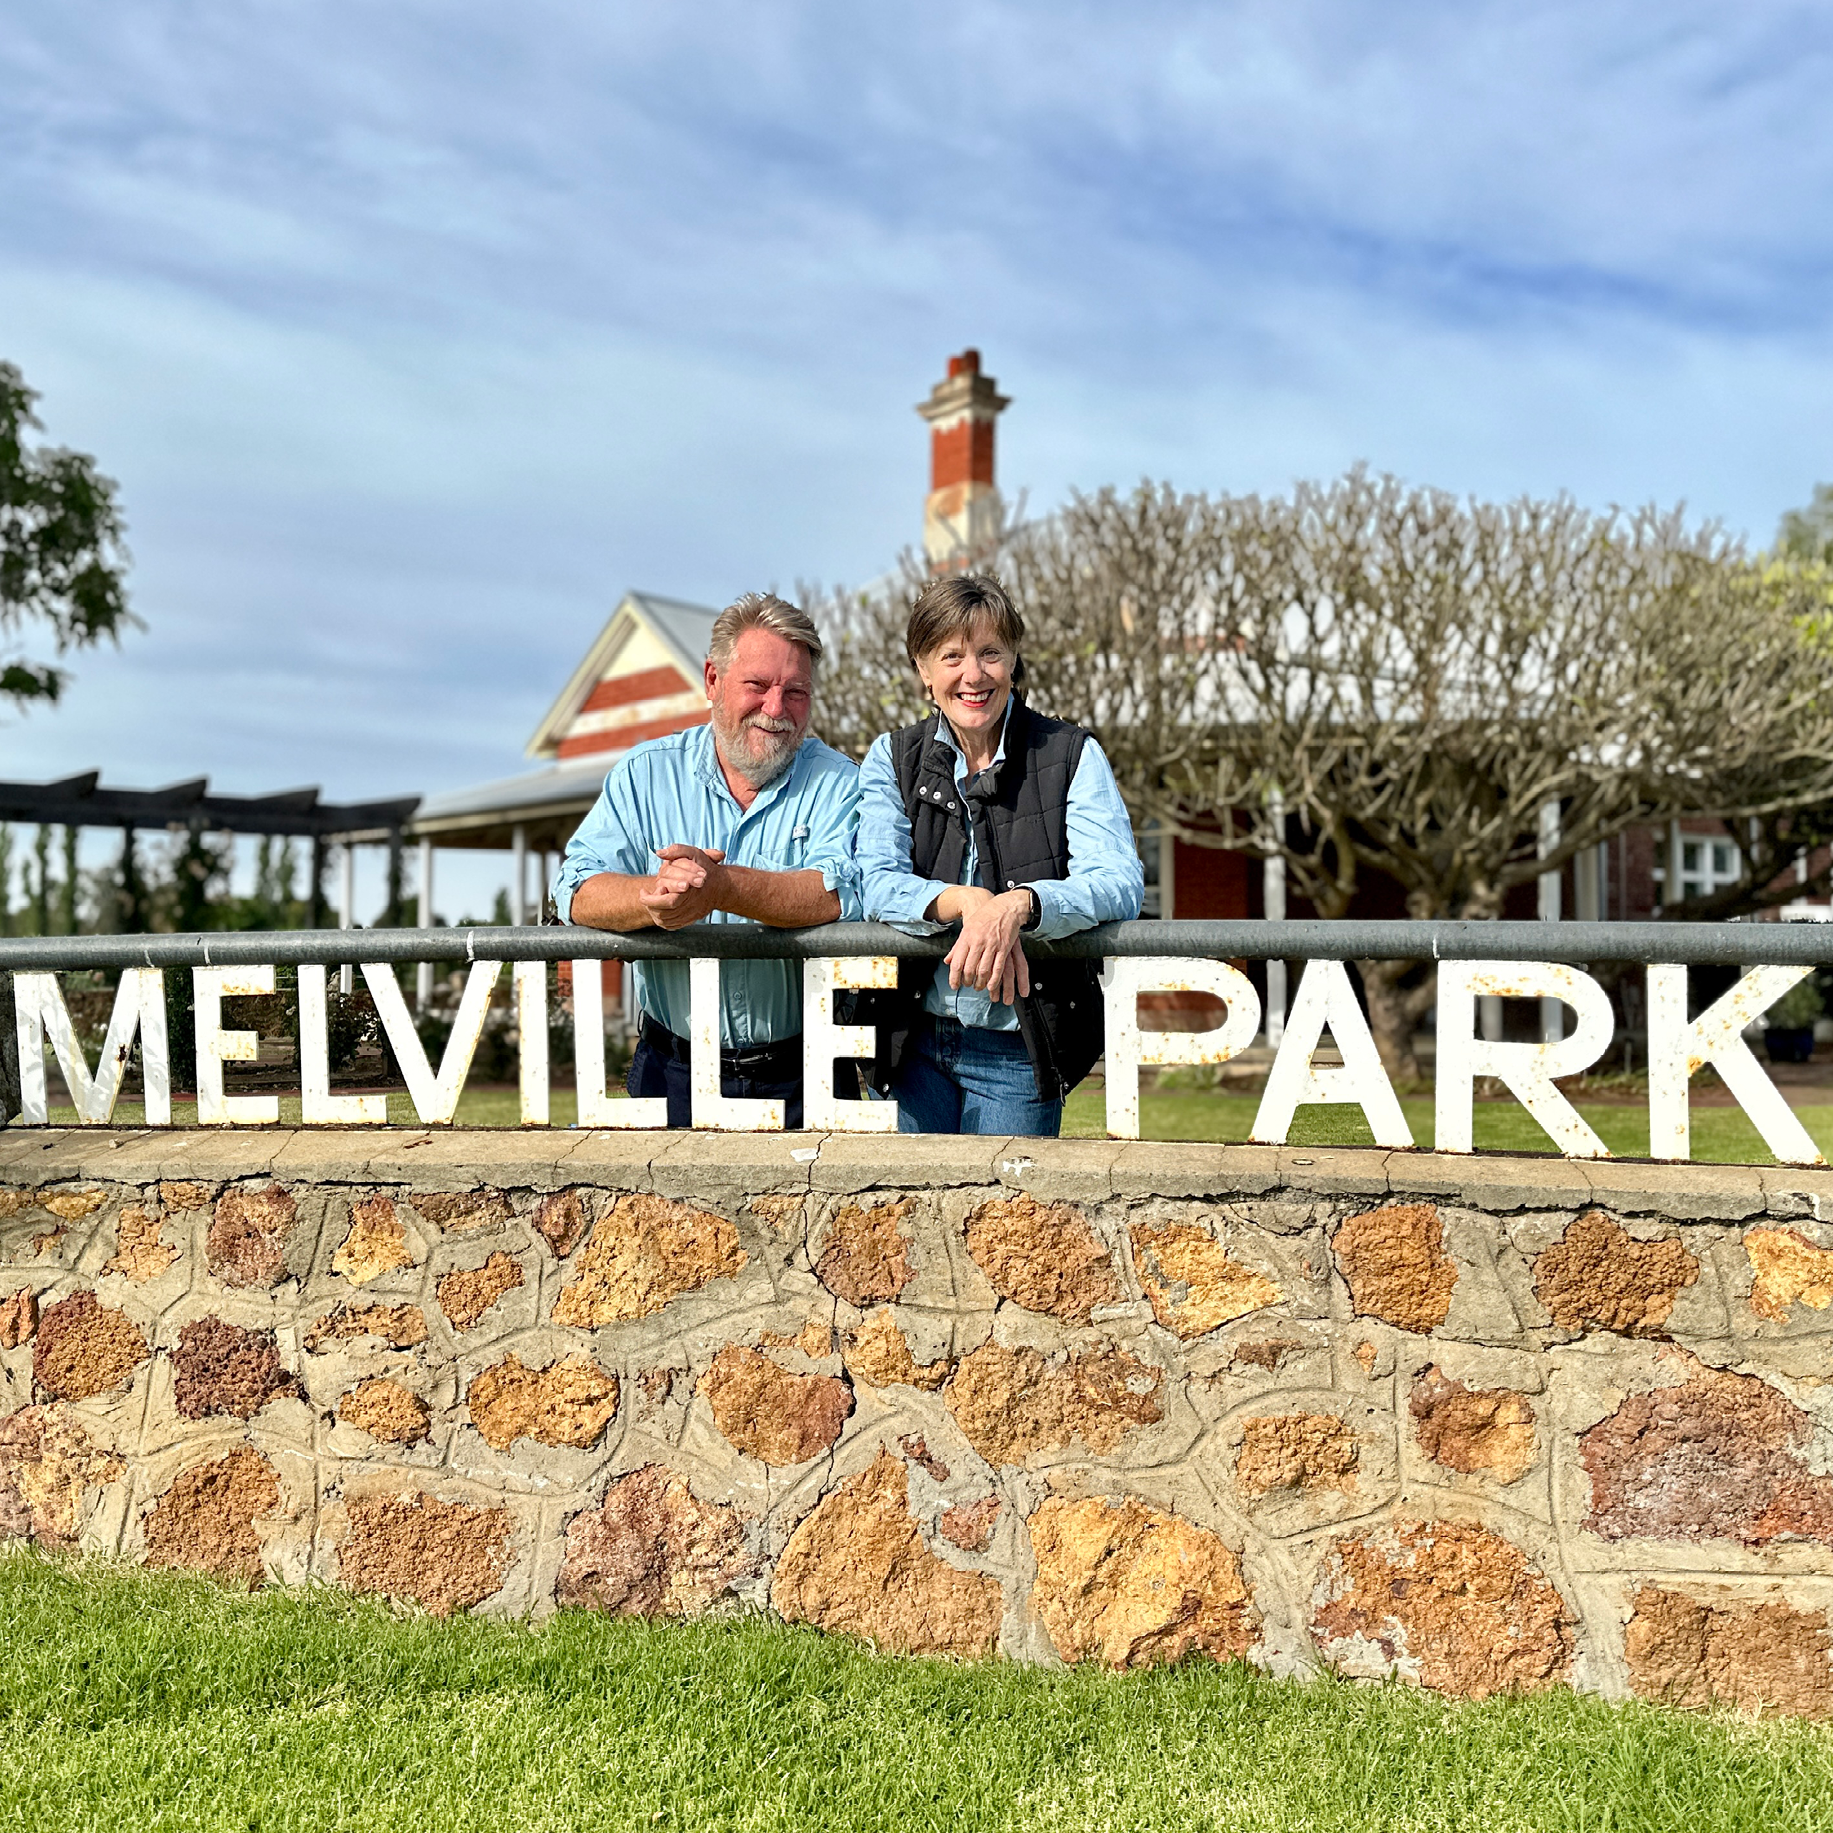 Custodians David and Barbara stand outside the Melville Park homestead.